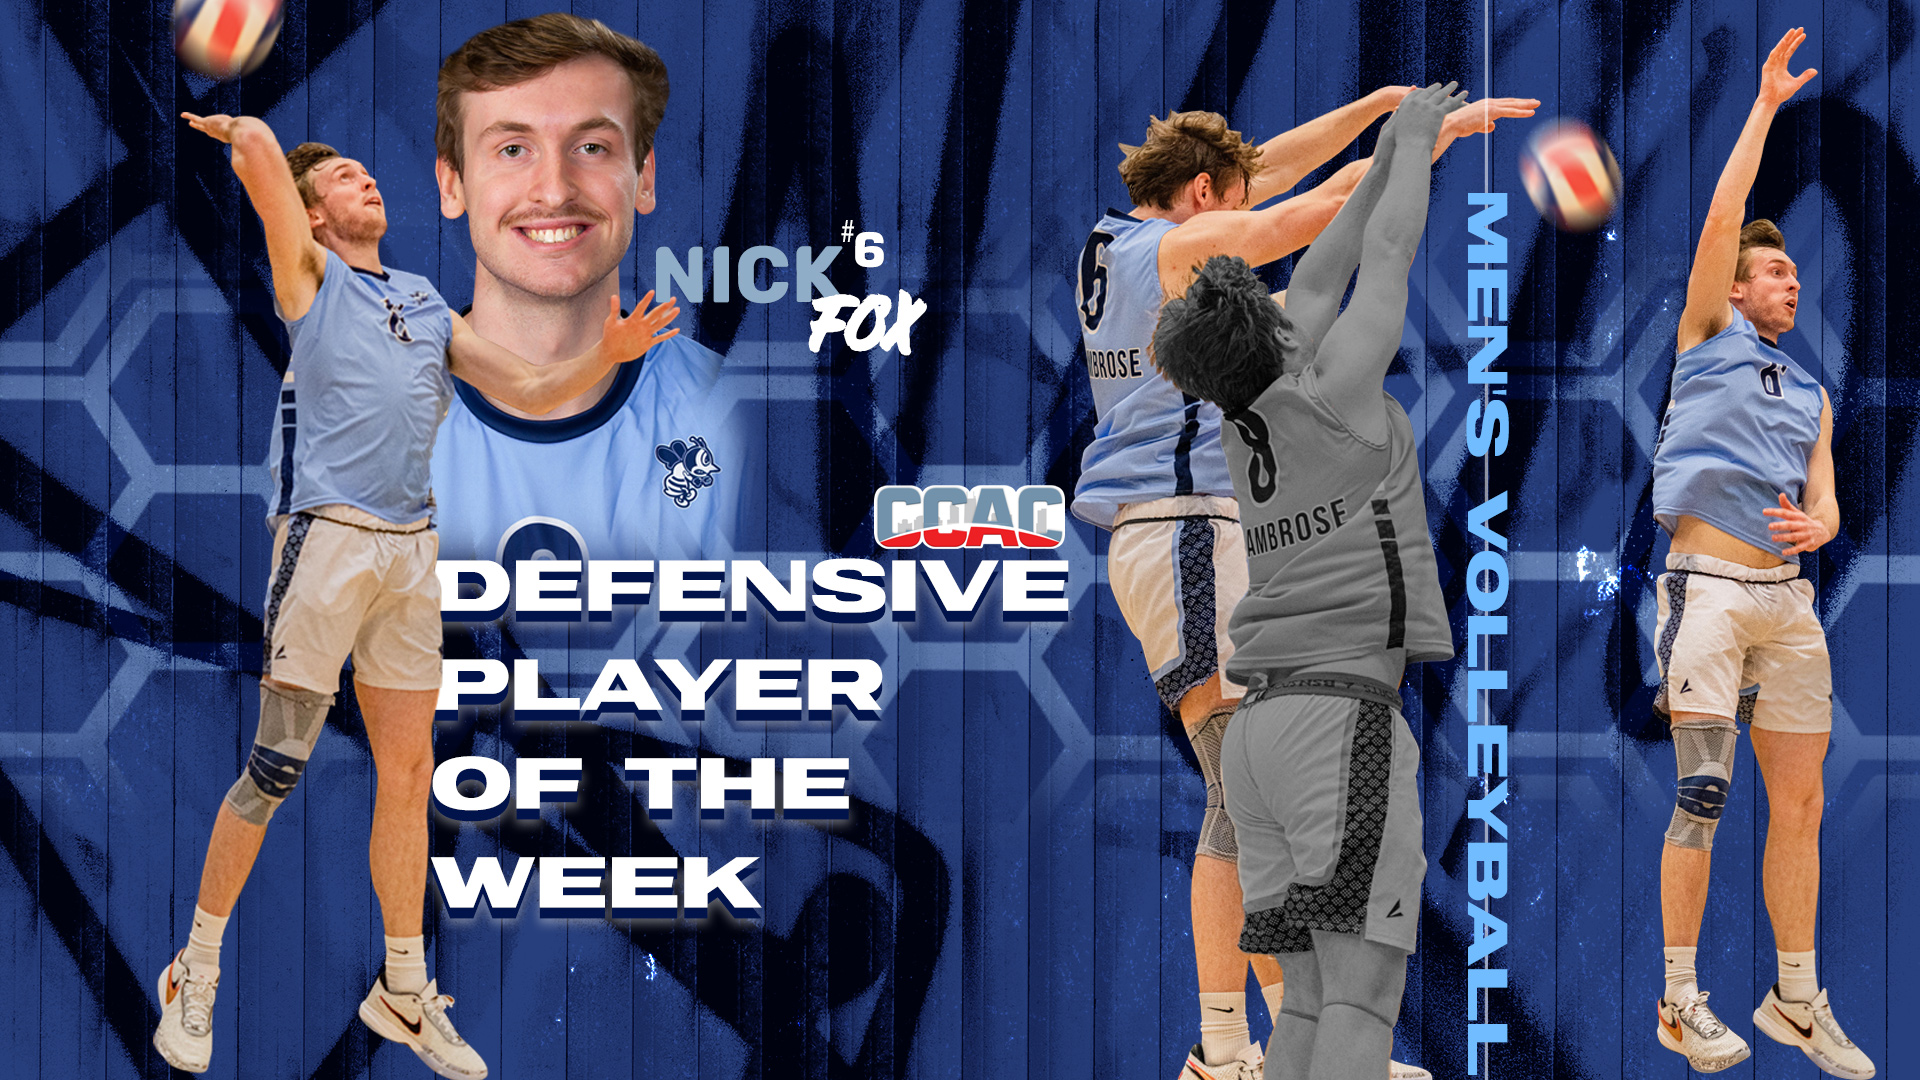 Fox named CCAC Defensive Player of the Week